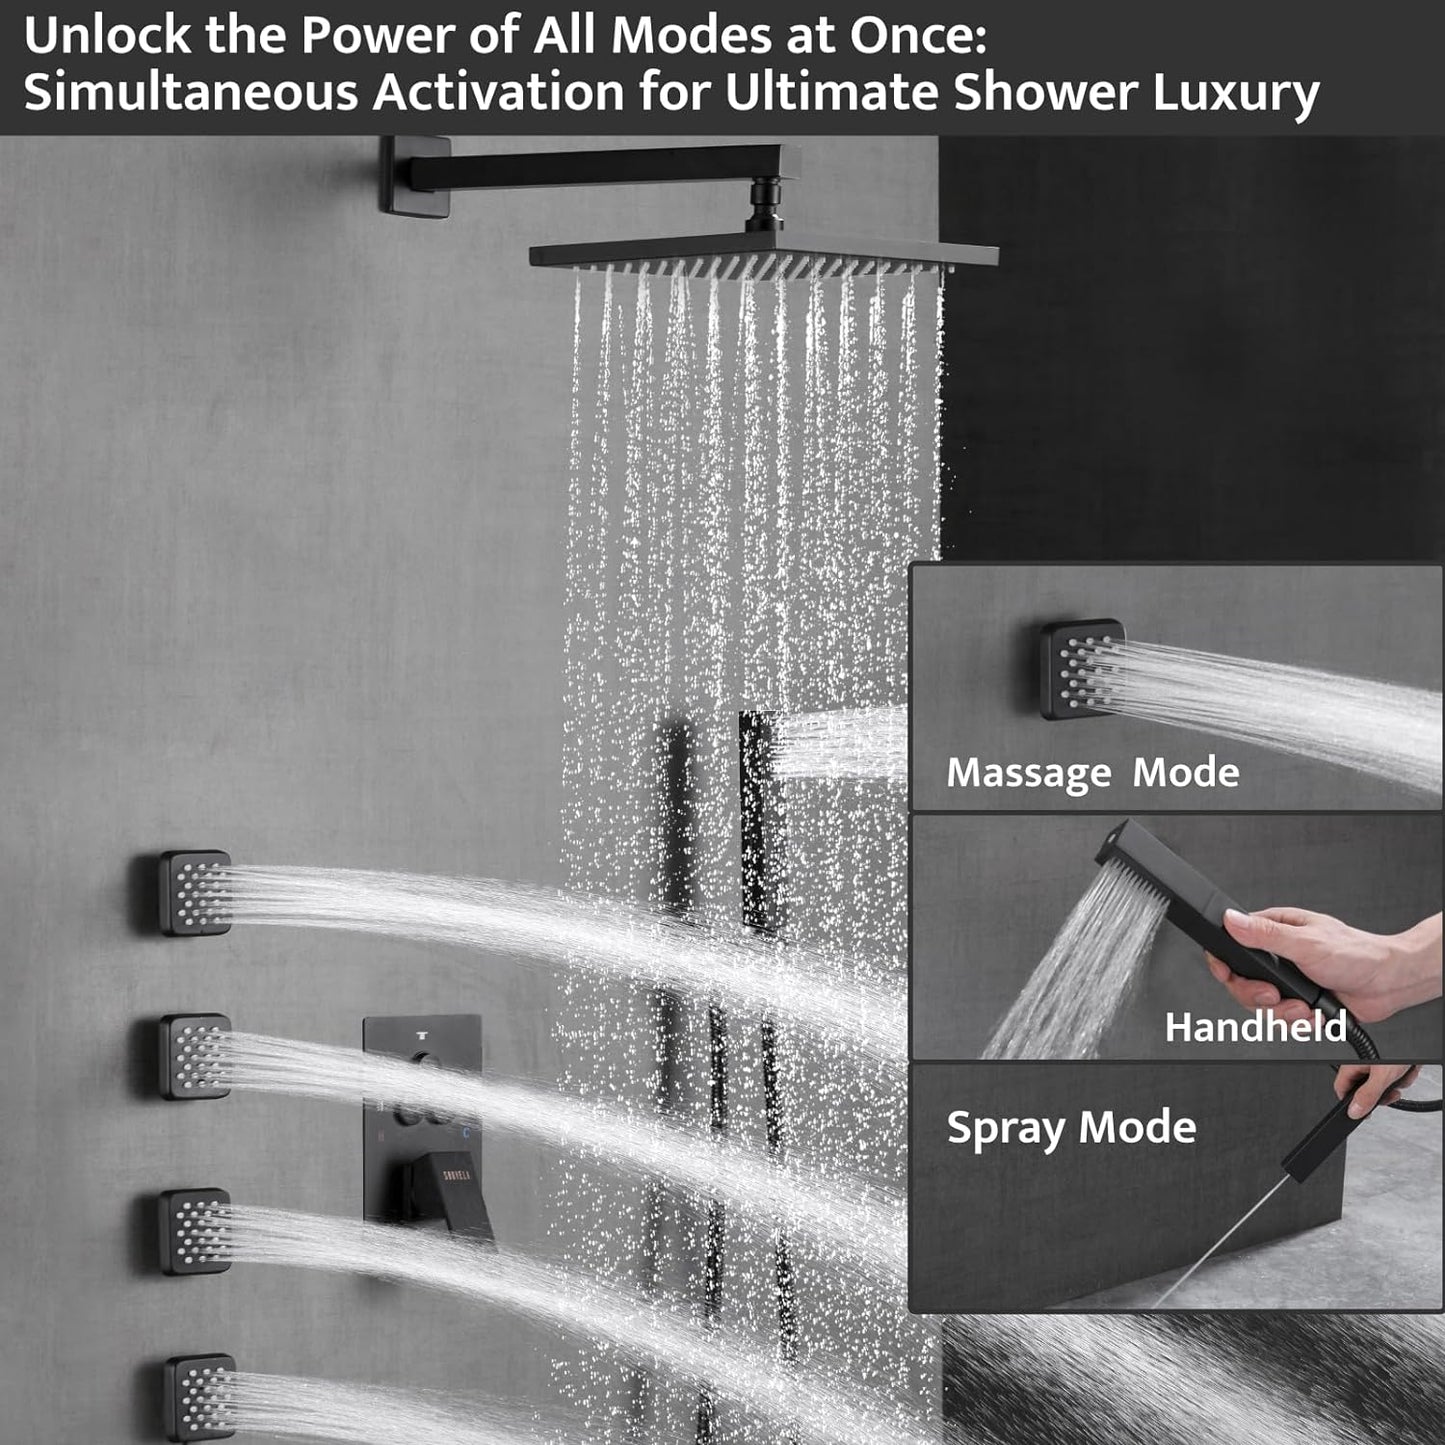 SHOYELA Shower System Matte Black Wall Mount Shower Faucet Set with 4PCS Body Jets, Push Button Diverter Shower Fixtures with 2 in 1 Handheld,10 Inch Shower HeadAll Functions Simultaneous Use